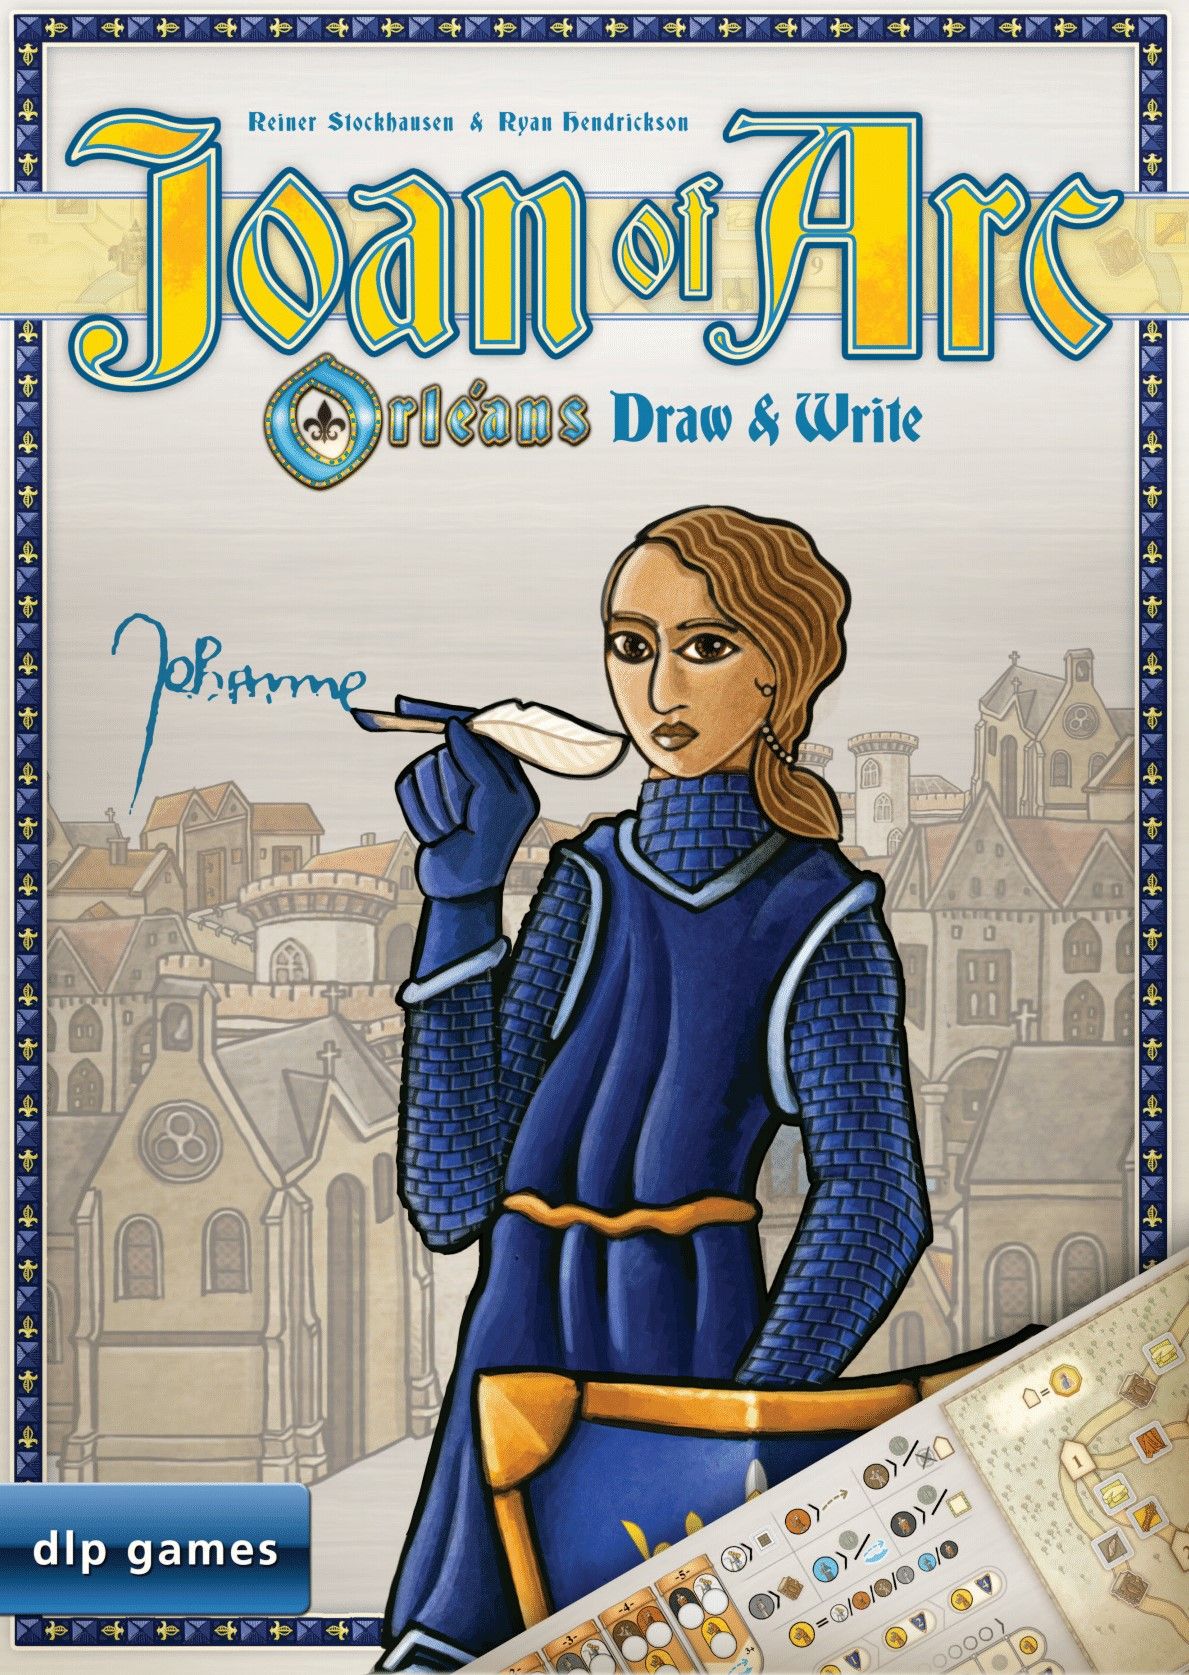 Joan of Arc - Orleans Draw & Write - Extra Block